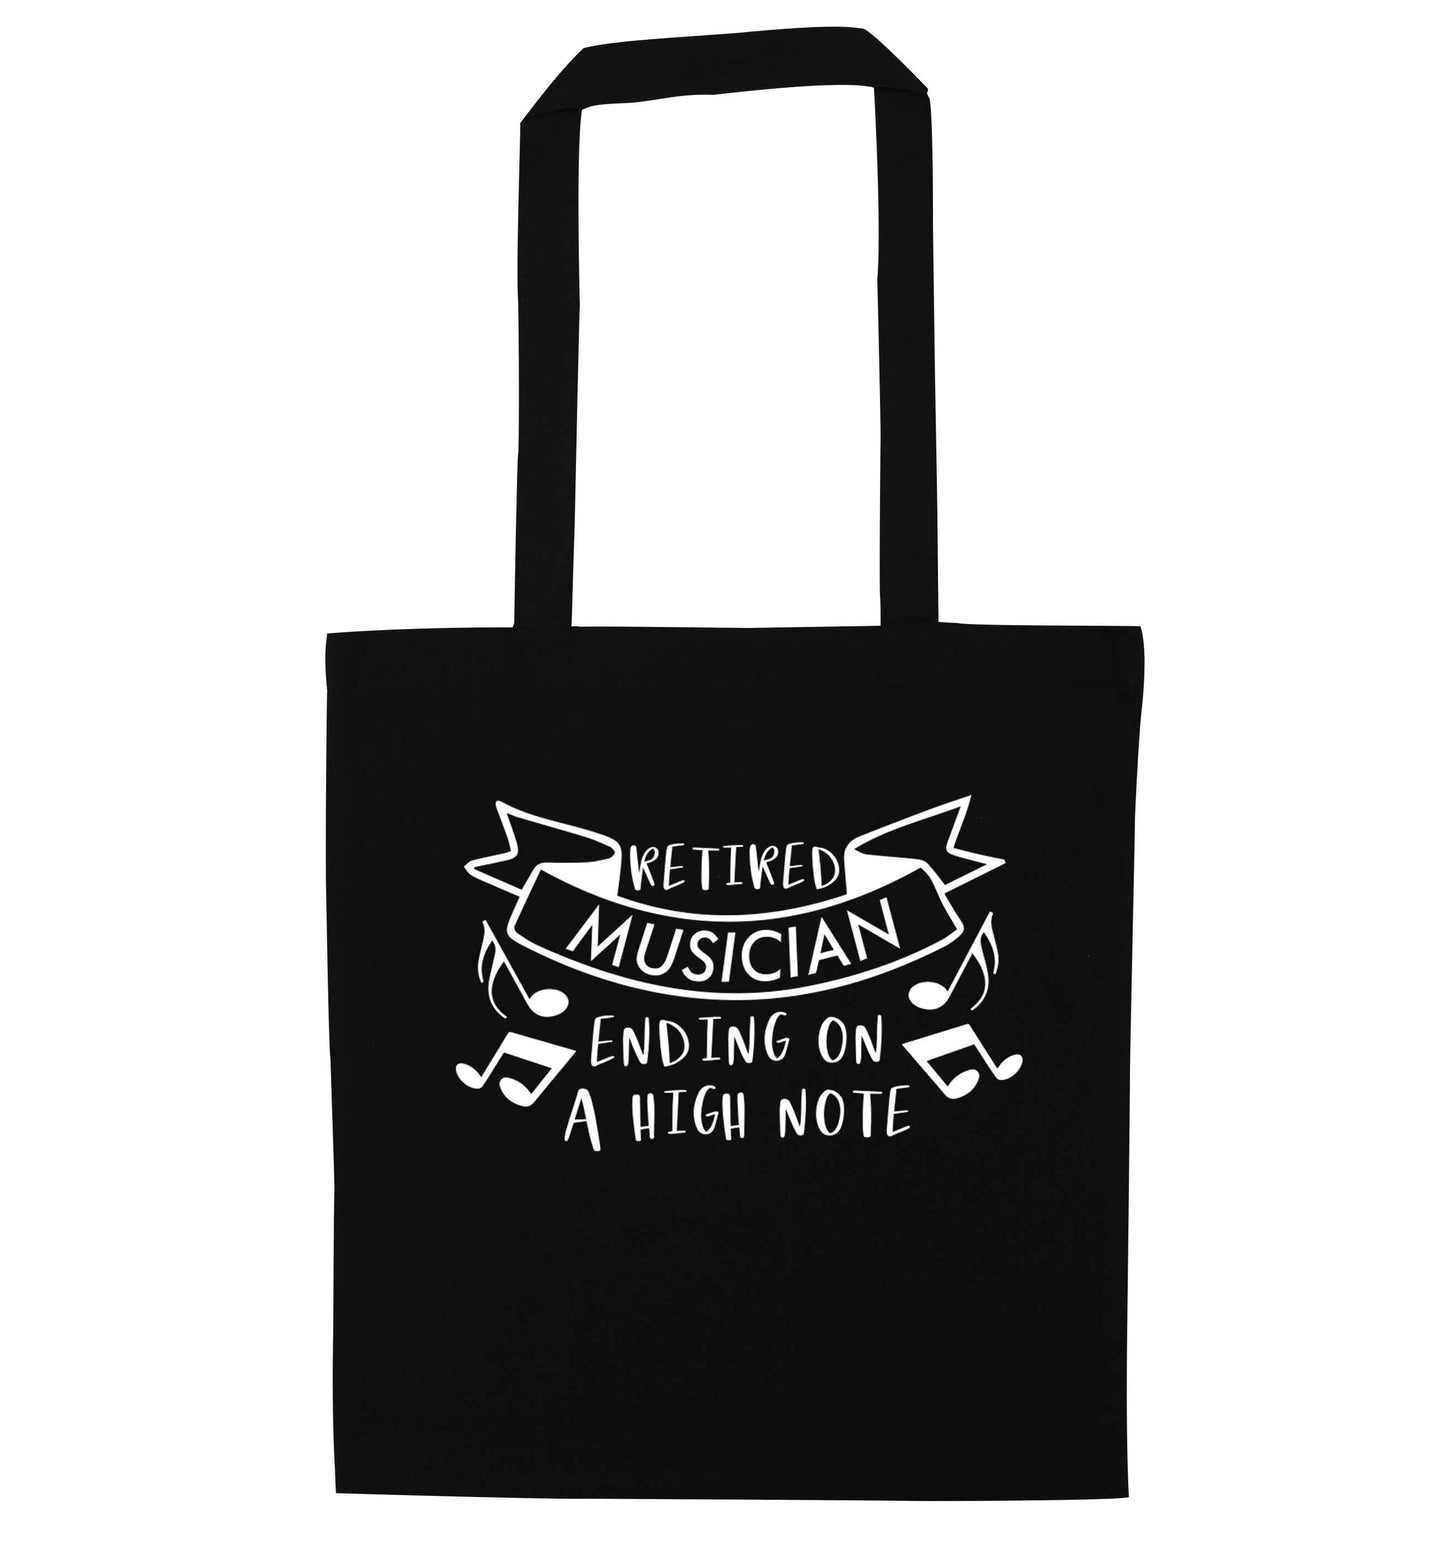 Retired musician ending on a high note black tote bag